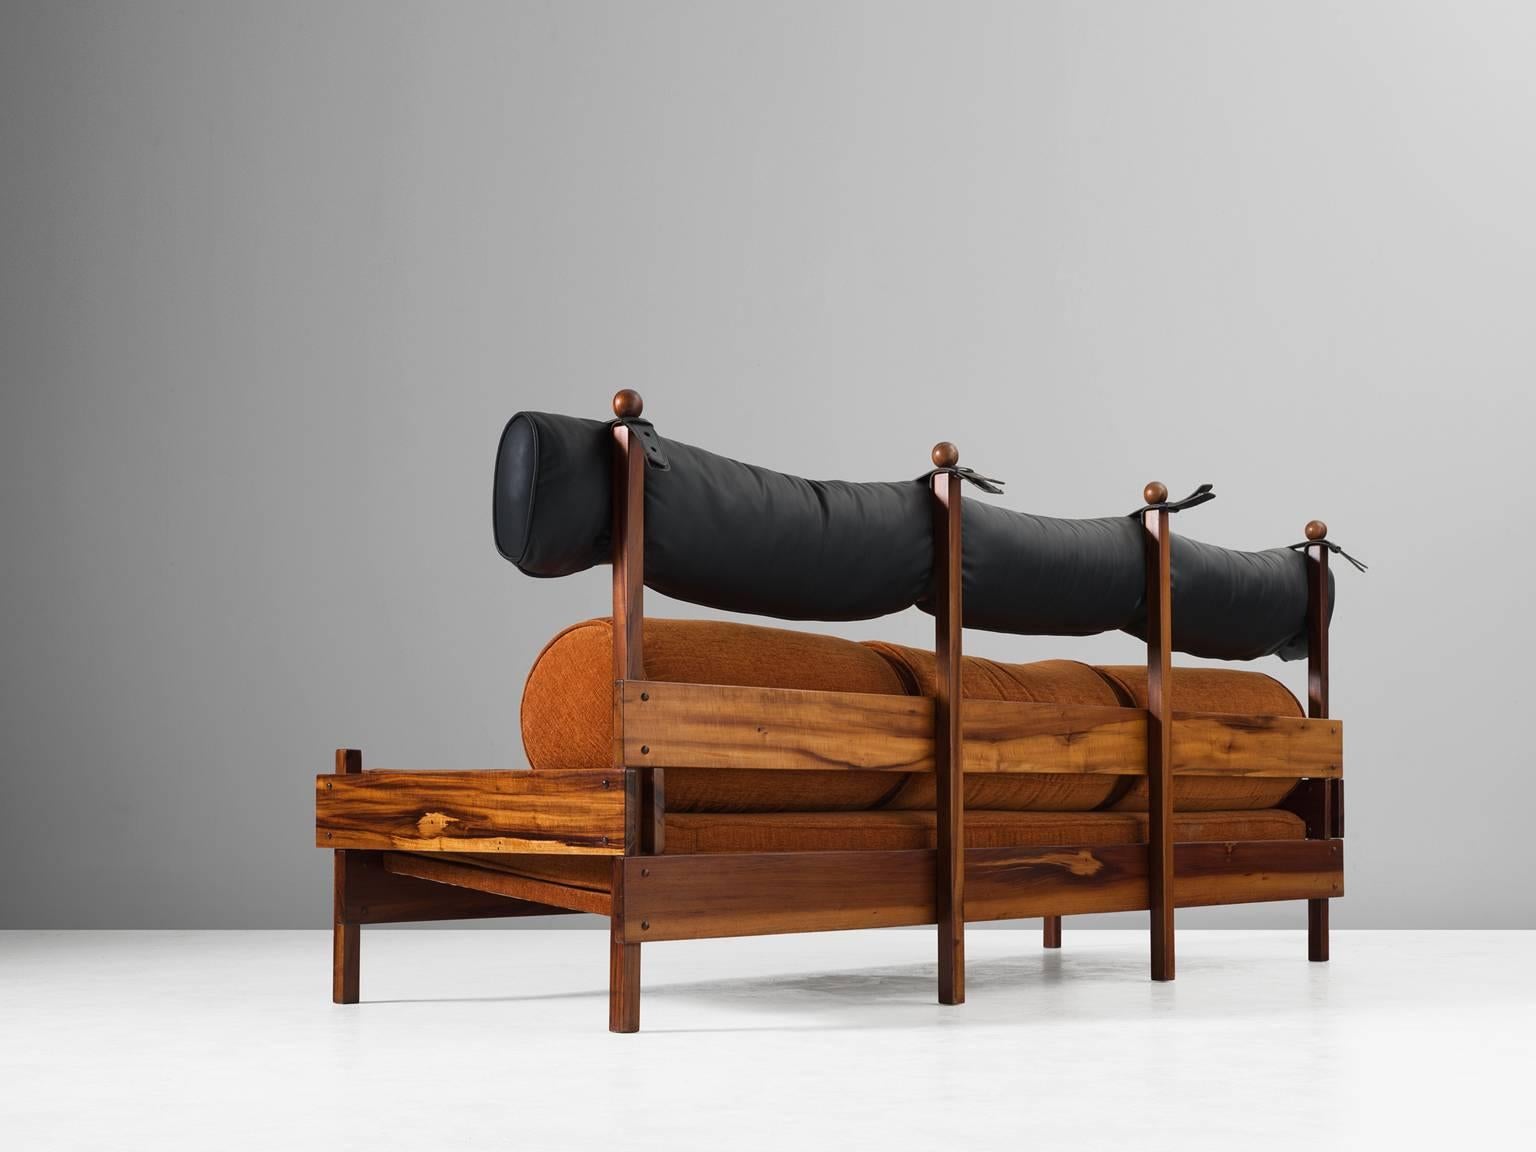 Sofa 'Tonico', in rosewood, fabric and faux-leather, by Sergio Rodrigues for Oca, Brazil, 1960s.

Three-seat sofa in solid rosewood and colorful orange upholstery. Rodrigues designs are often characterised by a sturdy frame of solid rosewood